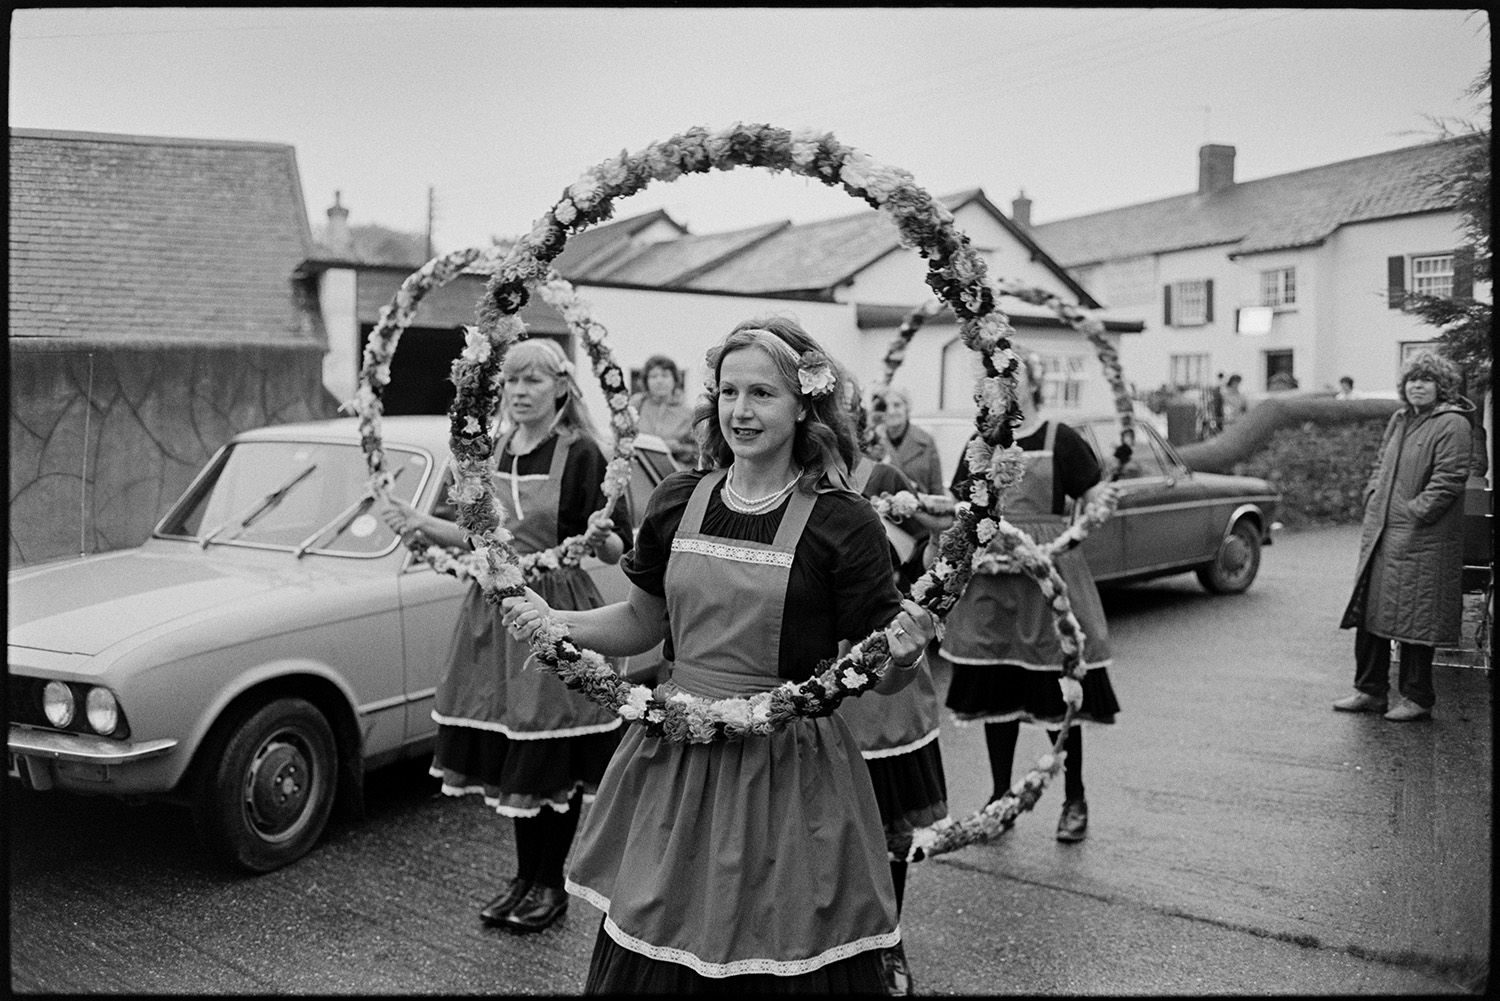 Women's Clog Dancing team at village carnival. 
[A group of women clog dancers performing with floral garlands in a street with parked cars at Dolton Carnival. People are watching them in the background.]